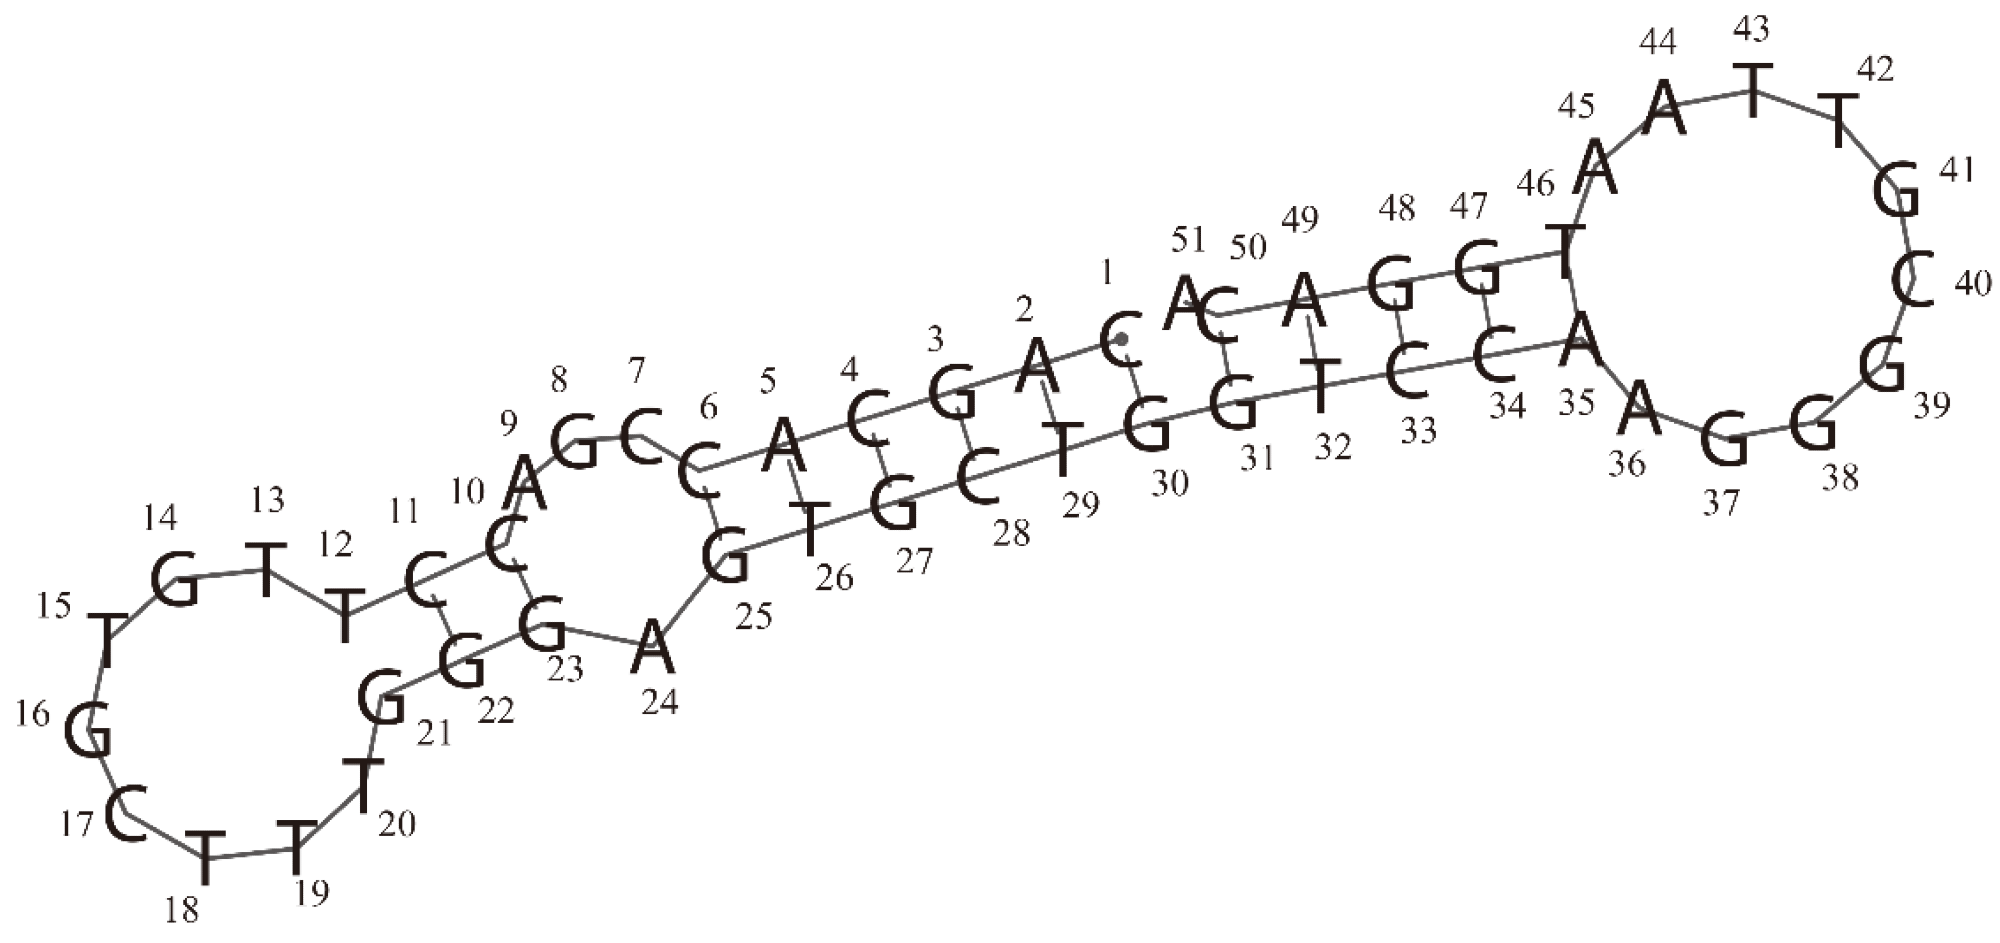 Secondary structure of the RBD-1C aptamer was predicted by the RNAfold web server. In this structure, 2 hairpins (at two ends) and 1 internal loop can be observed.